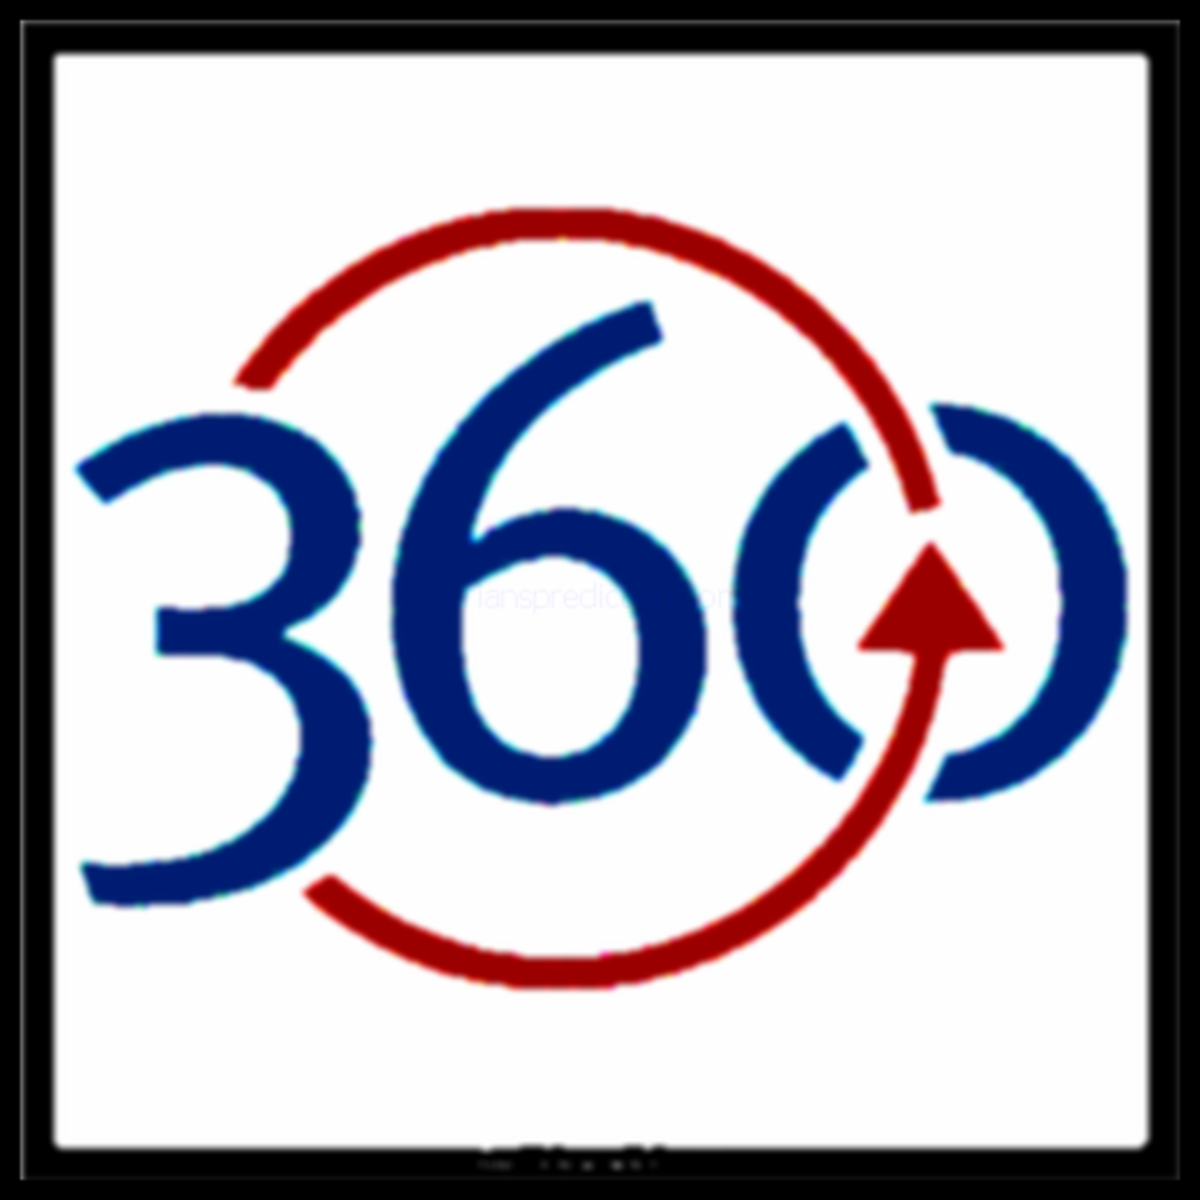 360 Matthew George Whitaker and World Patent Marketing Inc secrets you have got to see before they are pulled from the web 360    psychic Brian Ladd
360 Matthew George Whitaker and World Patent Marketing Inc secrets you have got to see before they are pulled from the web 360    psychic Brian Ladd
